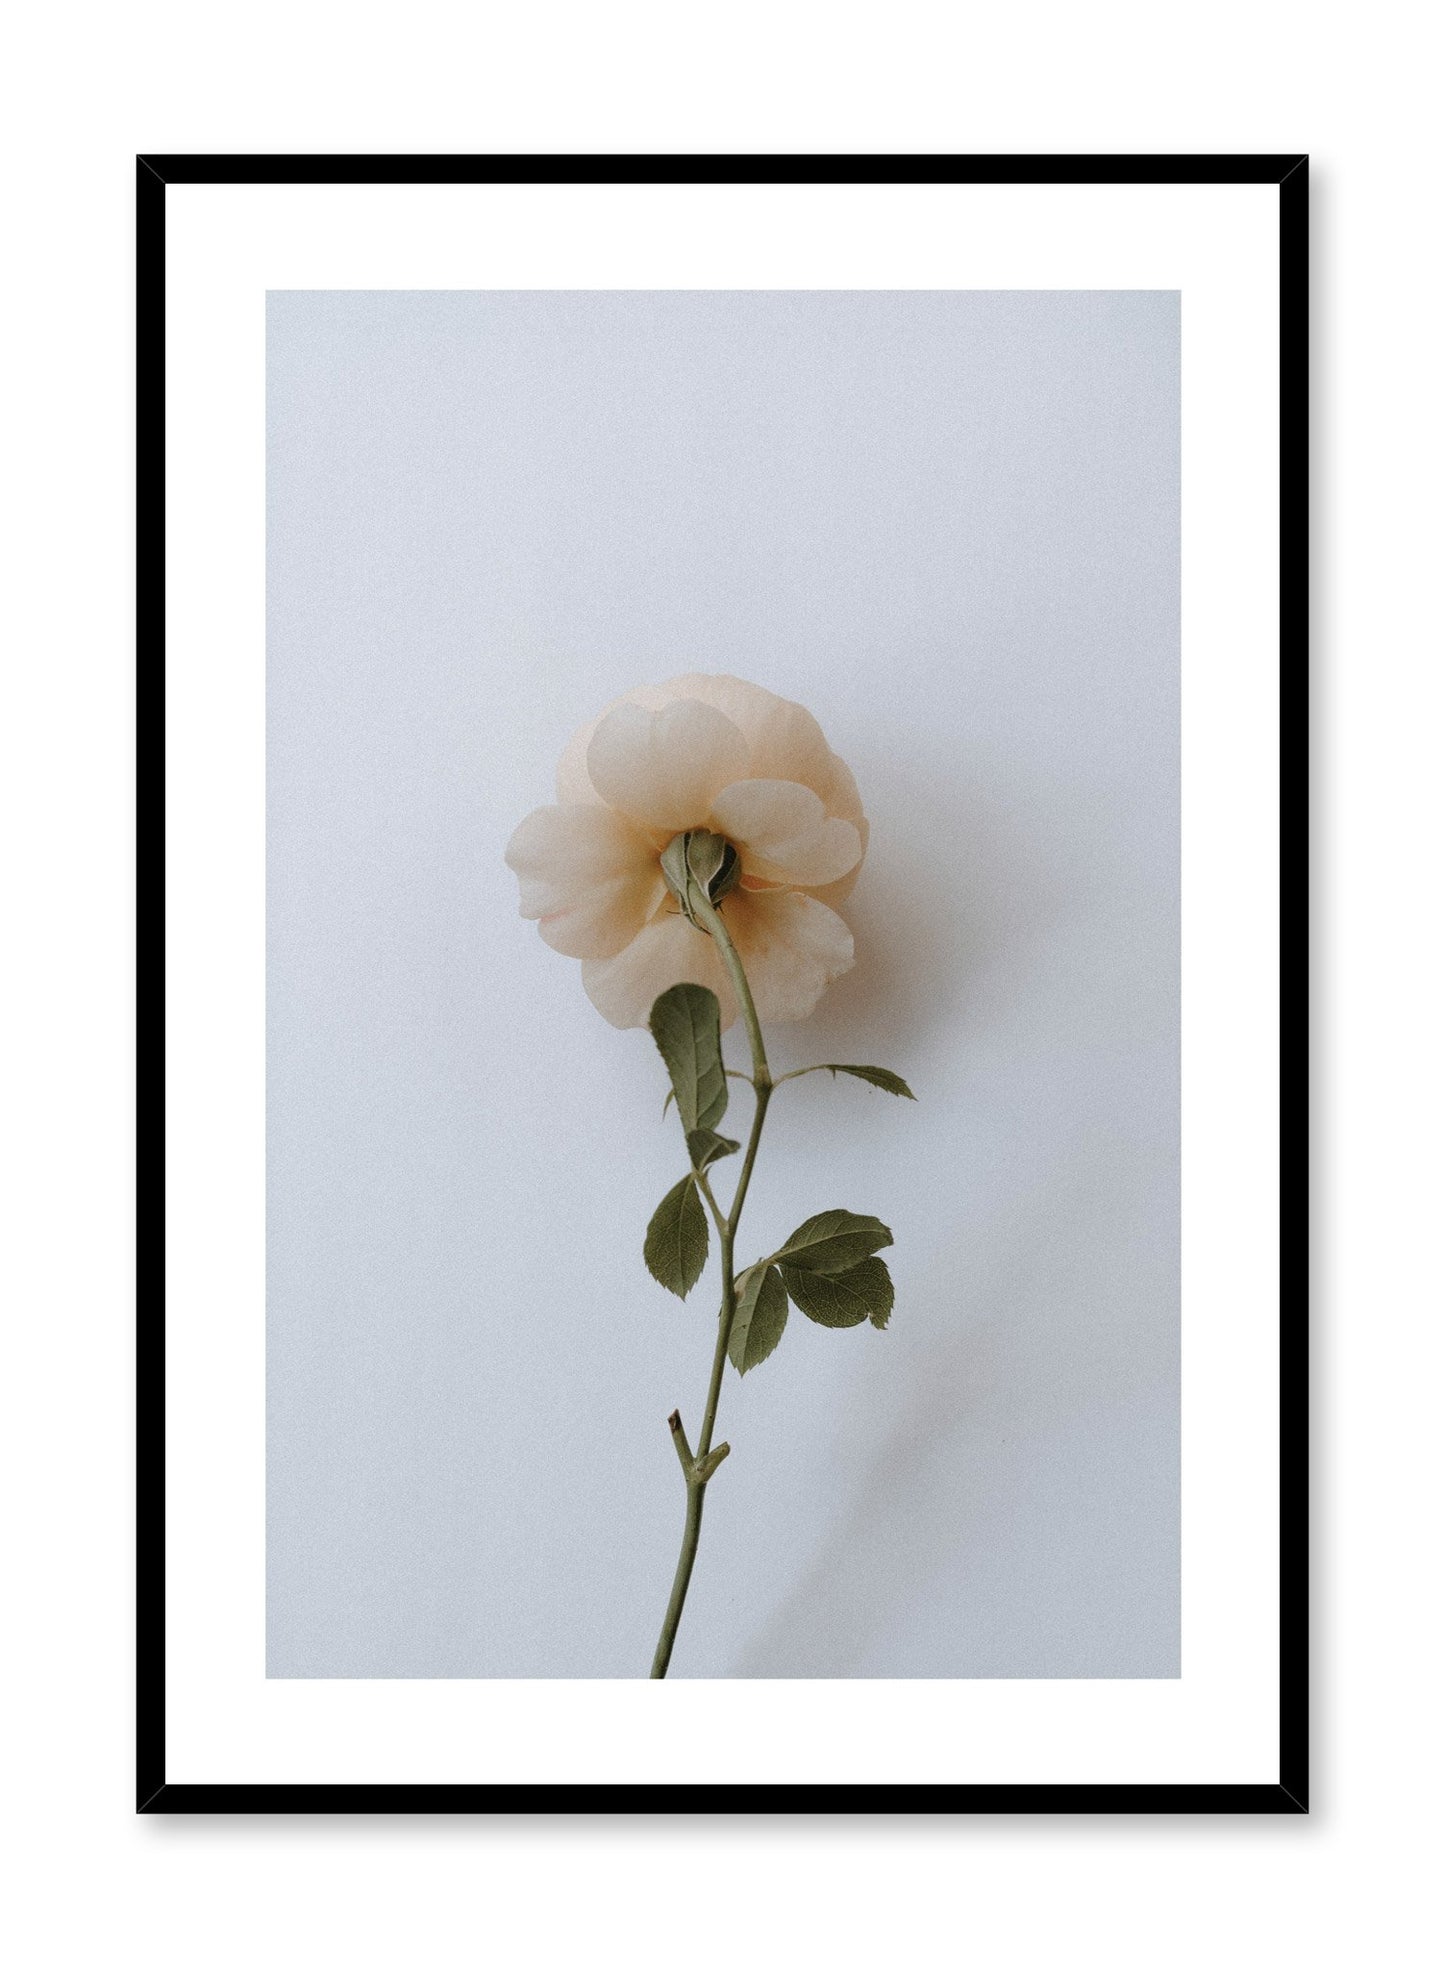 "Floral Romance" is a flower photography poster by Opposite Wall of a single light pink rose over a white background.